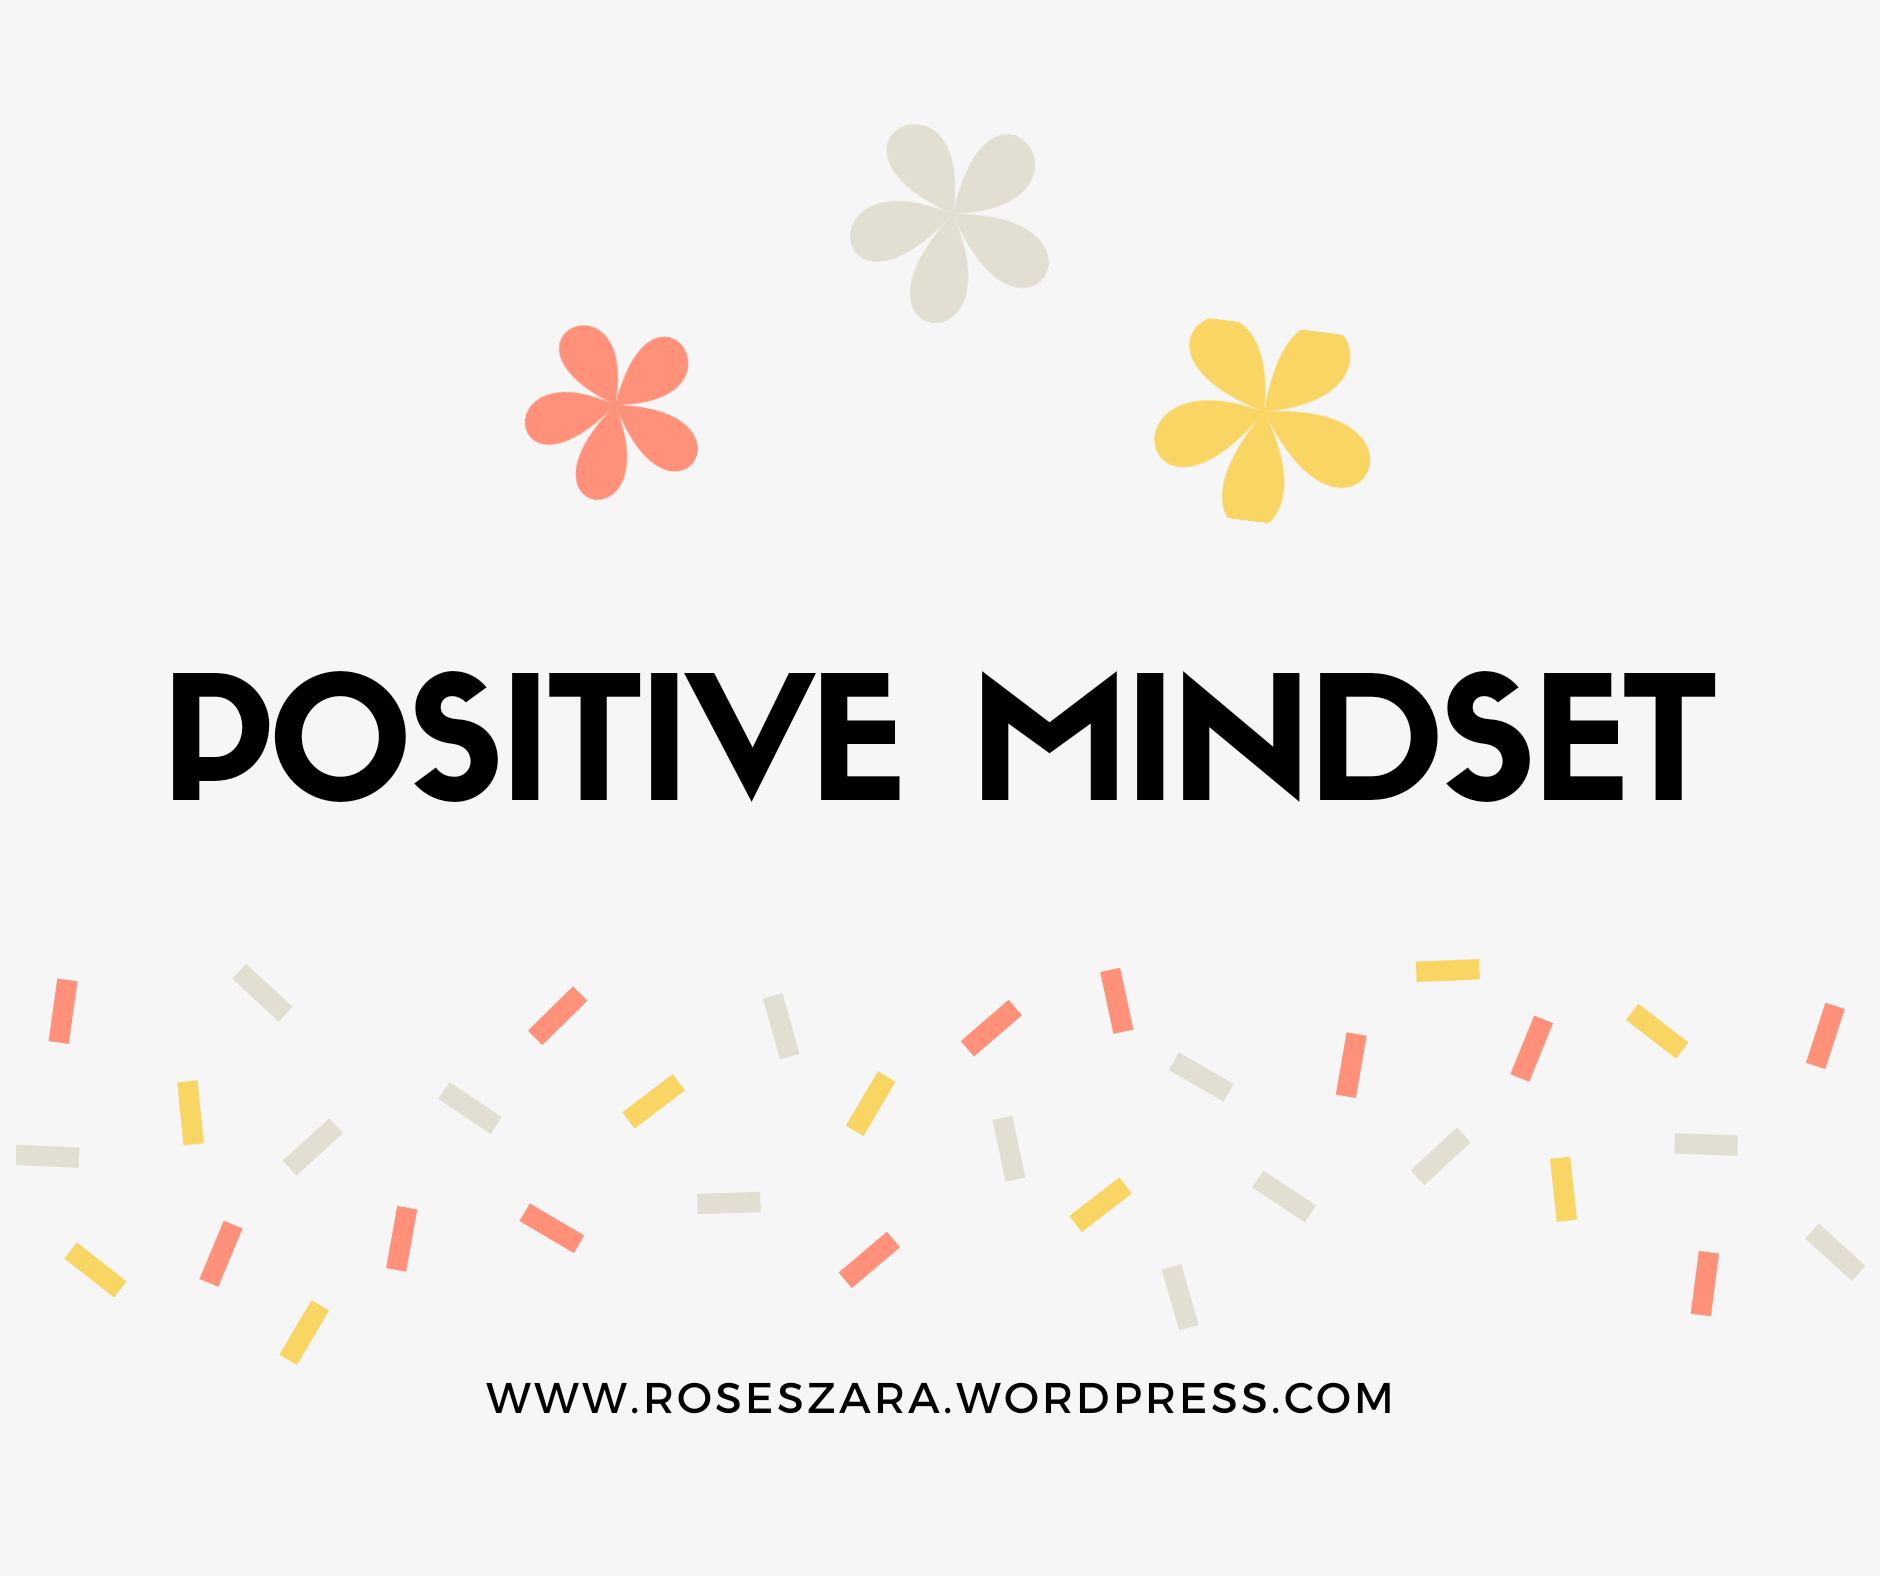 Keeping a postive mindset can get harder especially when facing taugh times. Read further to learn more about positive mindset.